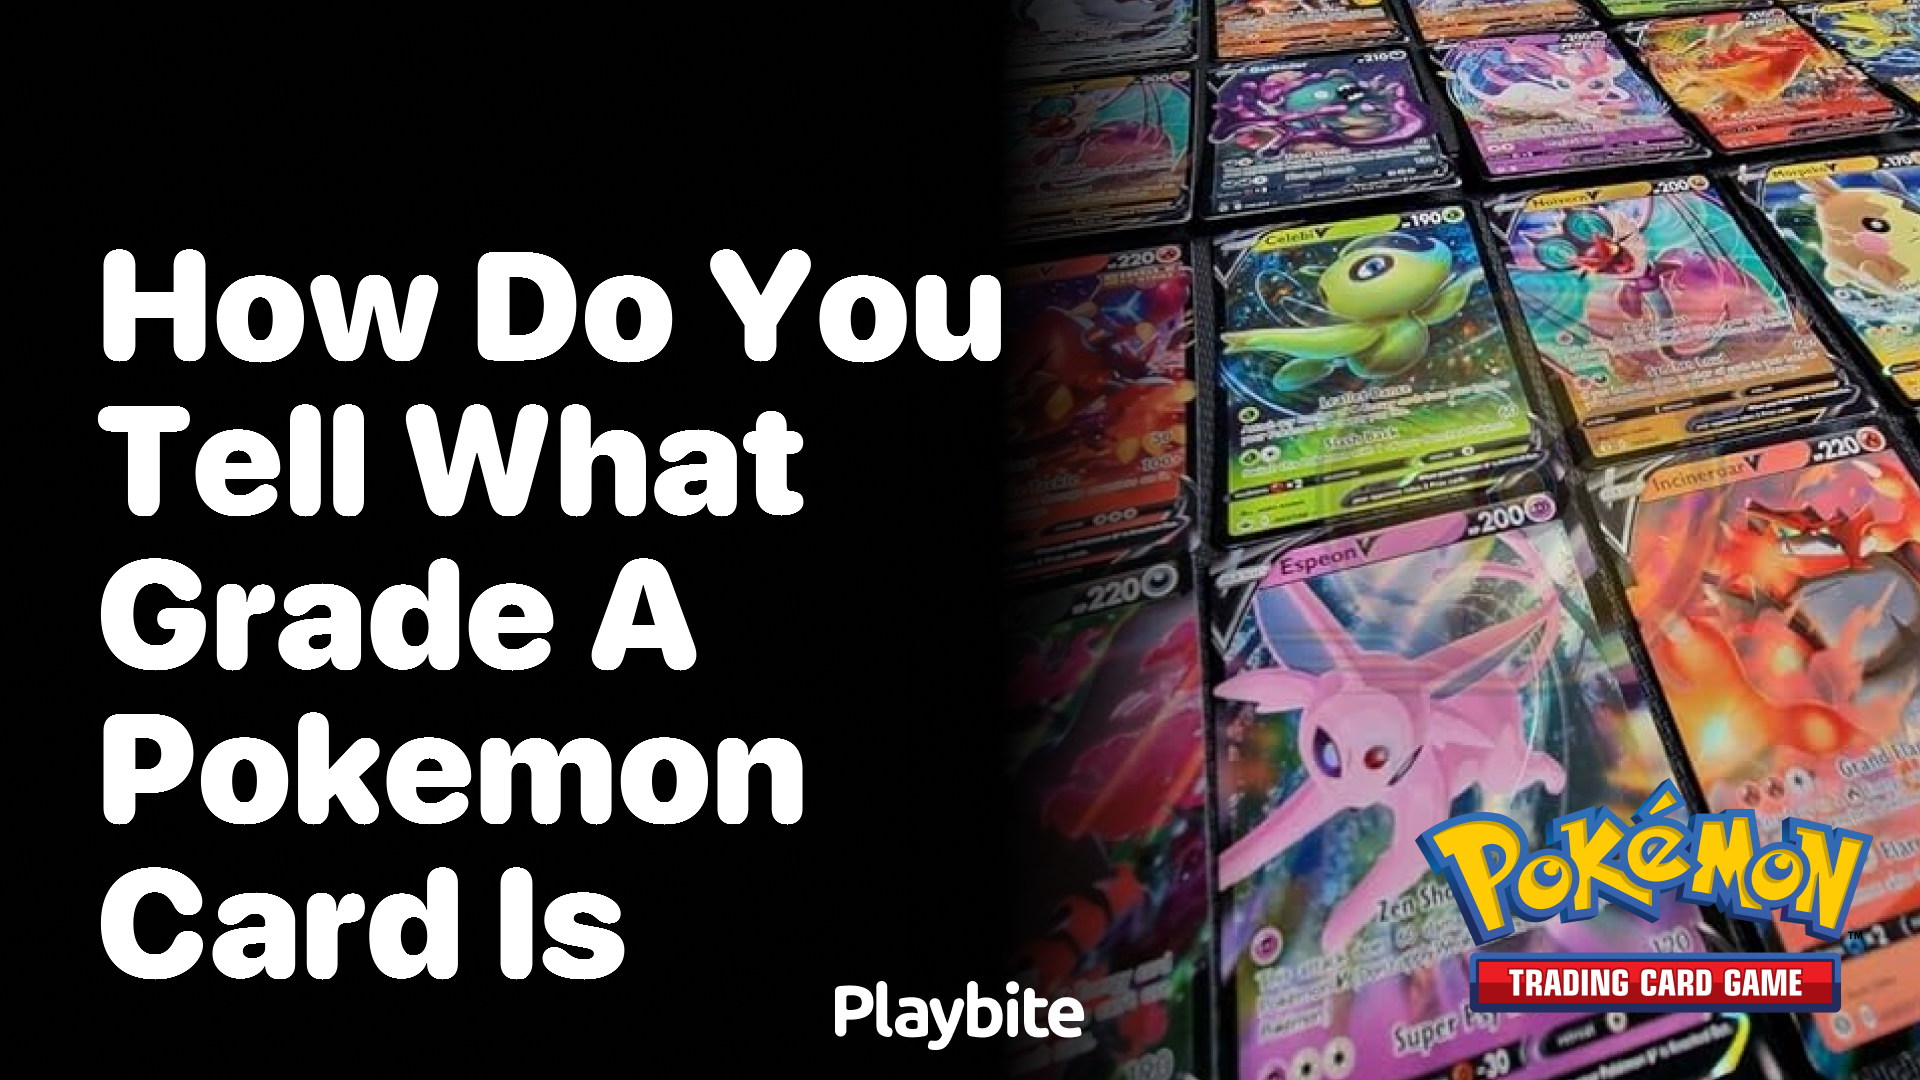 How do you tell what grade a Pokemon card is?